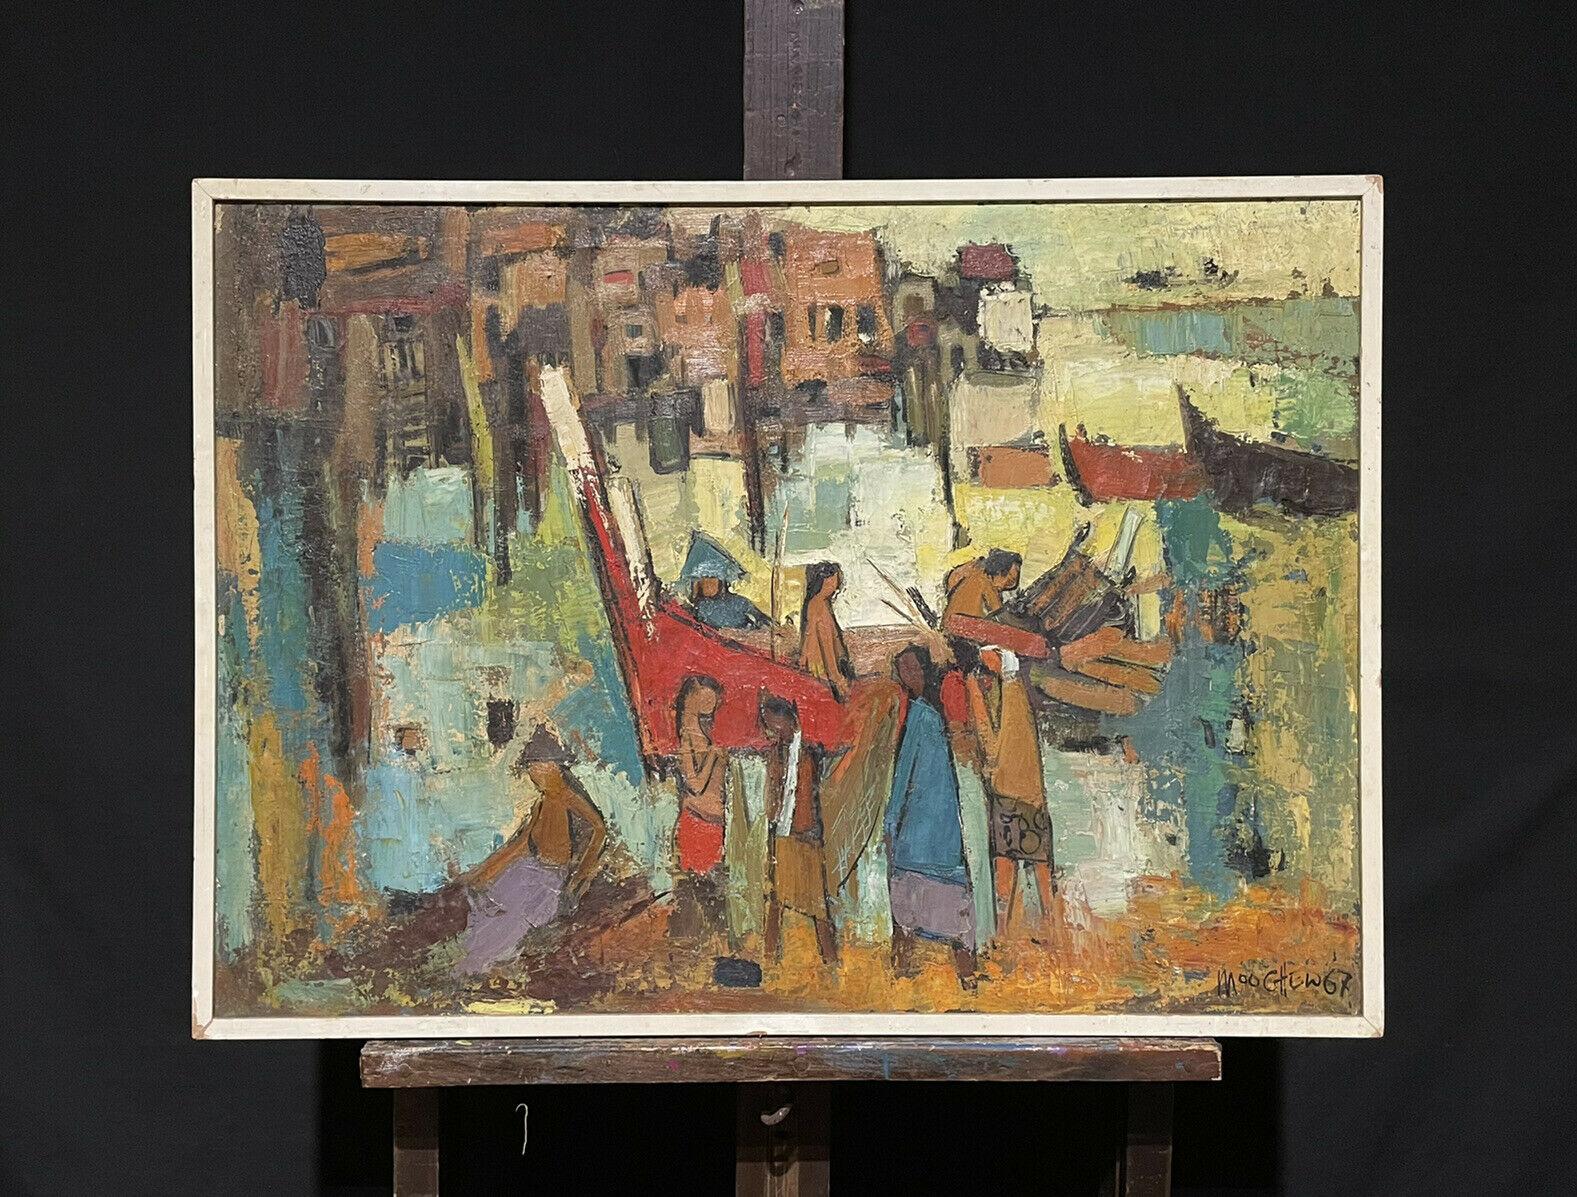 Abstract Painting Wong MOO CHEW - PENGHIDUPAN - Très grande huile sur toile moderniste des années 1960, signée, Fisherfolk in Harbour with Boats